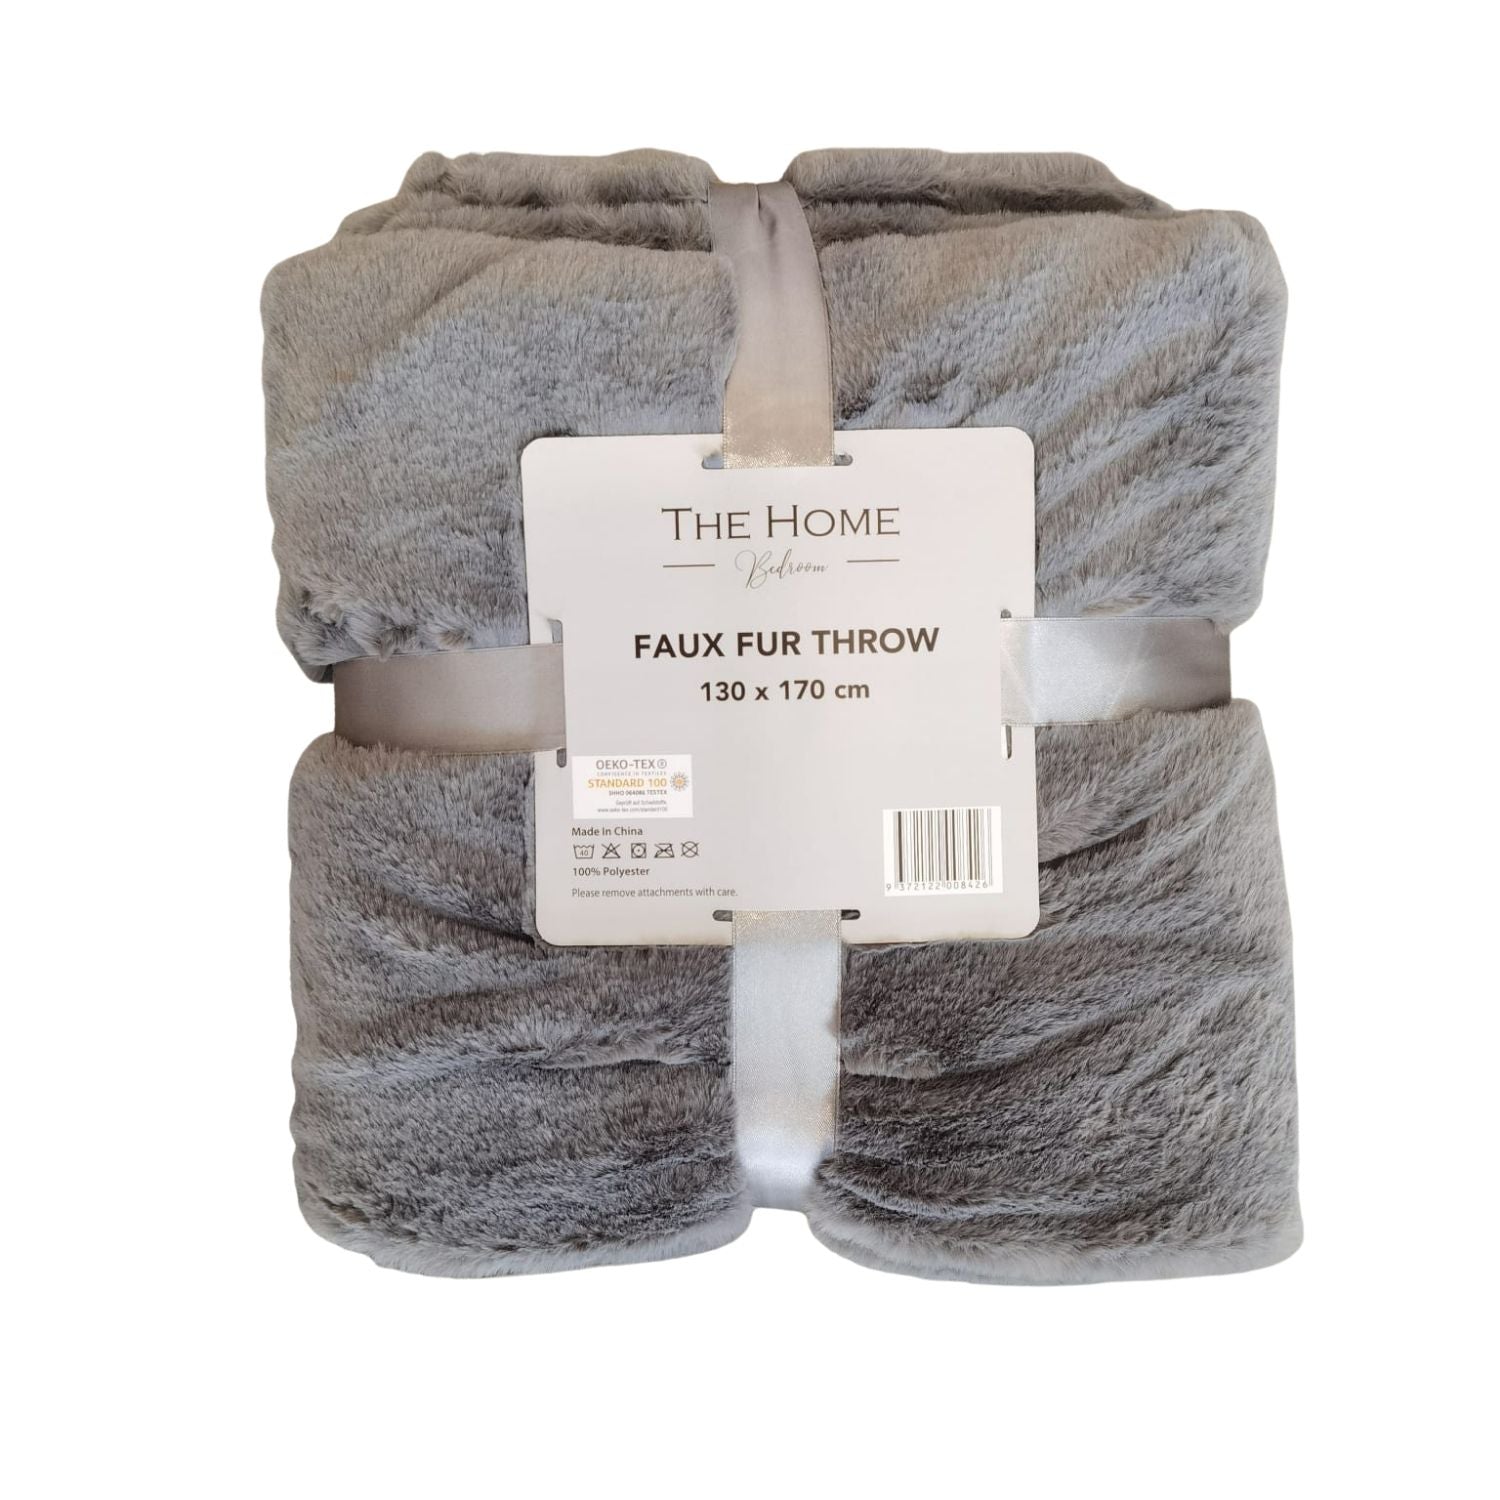 The Home Bedroom Super Soft Throw - 130X170cm 1 Shaws Department Stores